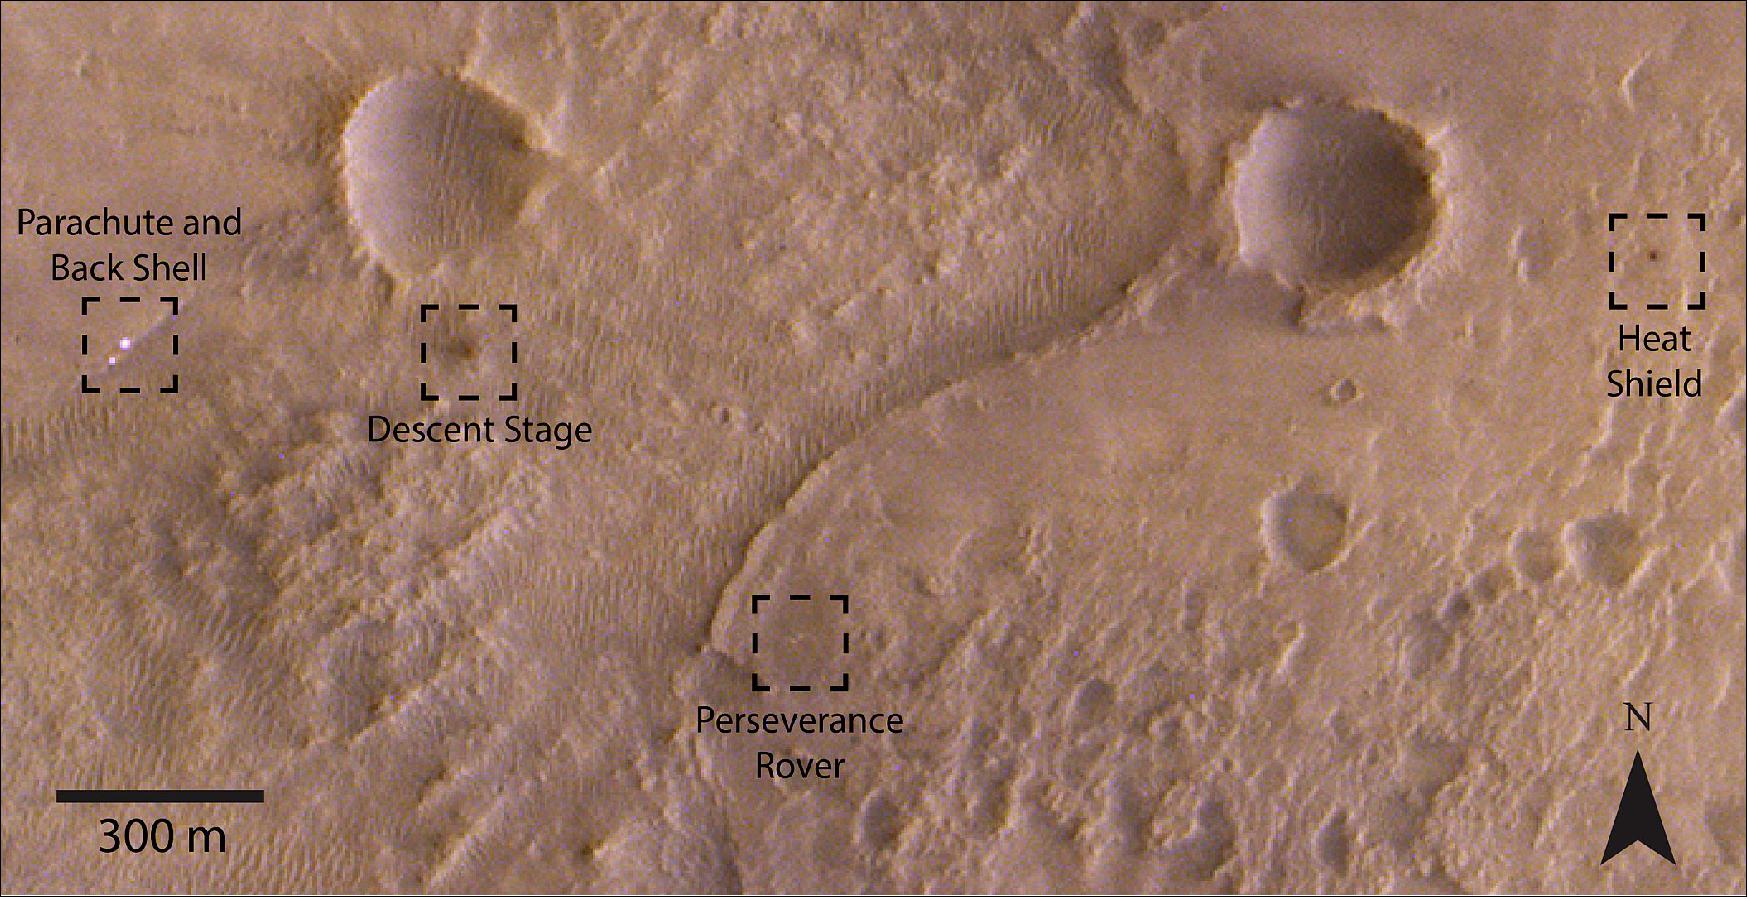 Figure 27: ExoMars orbiter images Perseverance landing site (labelled). The ESA-Roscosmos Trace Gas Orbiter has spotted NASA’s Mars 2020 Perseverance rover, along with its parachute and back shell, heat shield and descent stage, in the Jezero Crater region of Mars. The images were captured with the orbiter’s CaSSIS camera on 23 February 2021. The components are labelled and are seen as dark or bright pixels. In this image, the colors have been adjusted to resemble the typical red color of Mars, as would be seen by a human observer (image credit: ESA/Roscosmos/CaSSIS; acknowledgement A. Valantinas)